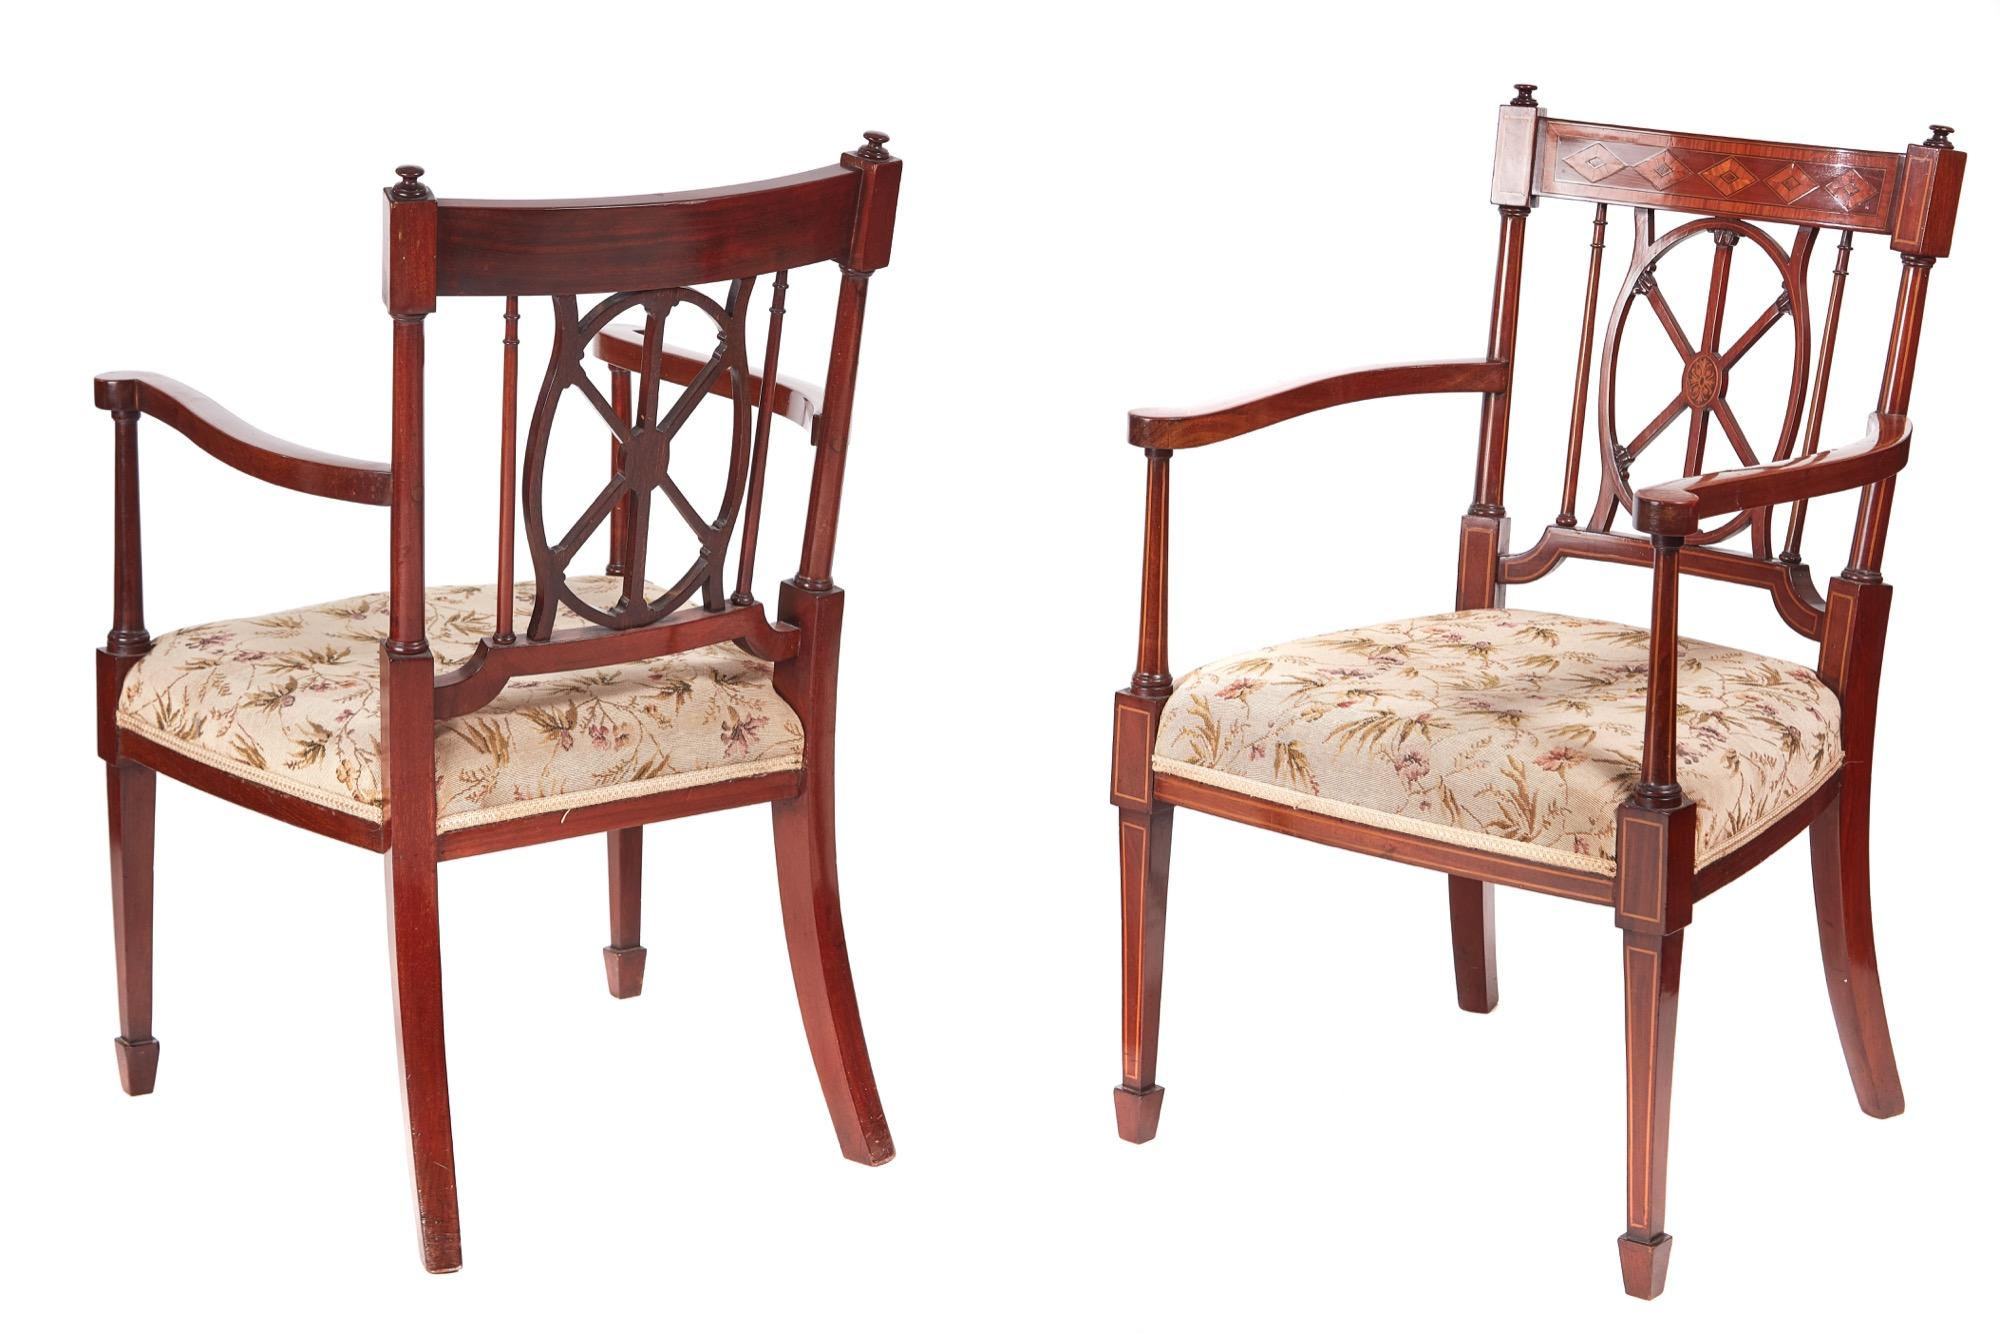 Quality pair of antique mahogany inlaid arm or desk chairs with fine inlaid satinwood tops and centre splat. They boast elegant shaped inlaid arms and are raised on inlaid square tapering front legs terminating in spade feet and outswept back